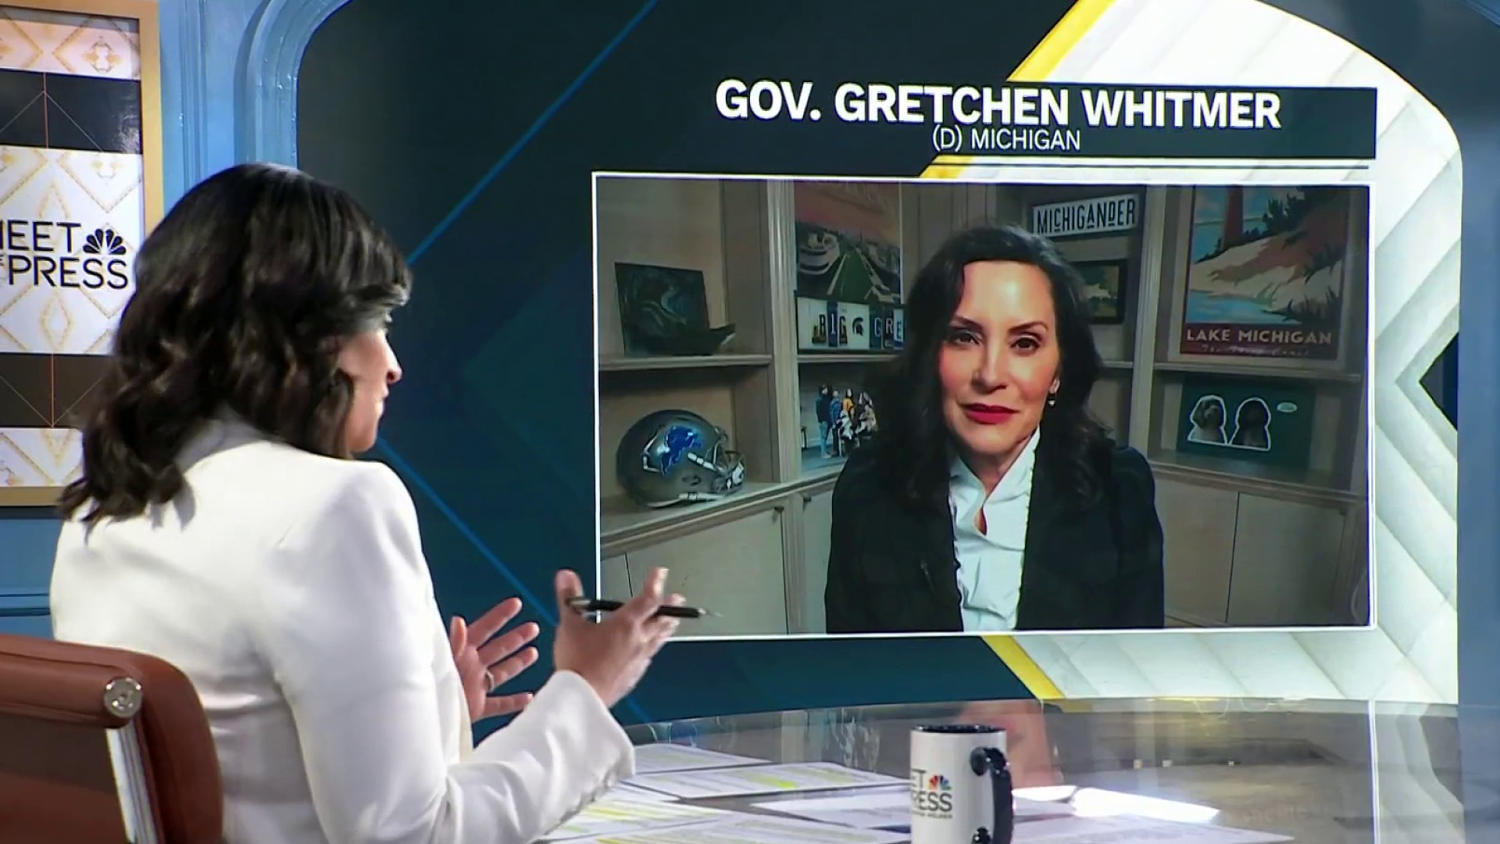 Is a genocide taking place in Gaza? 'I’m not going to weigh in,' says Michigan Gov. Whitmer